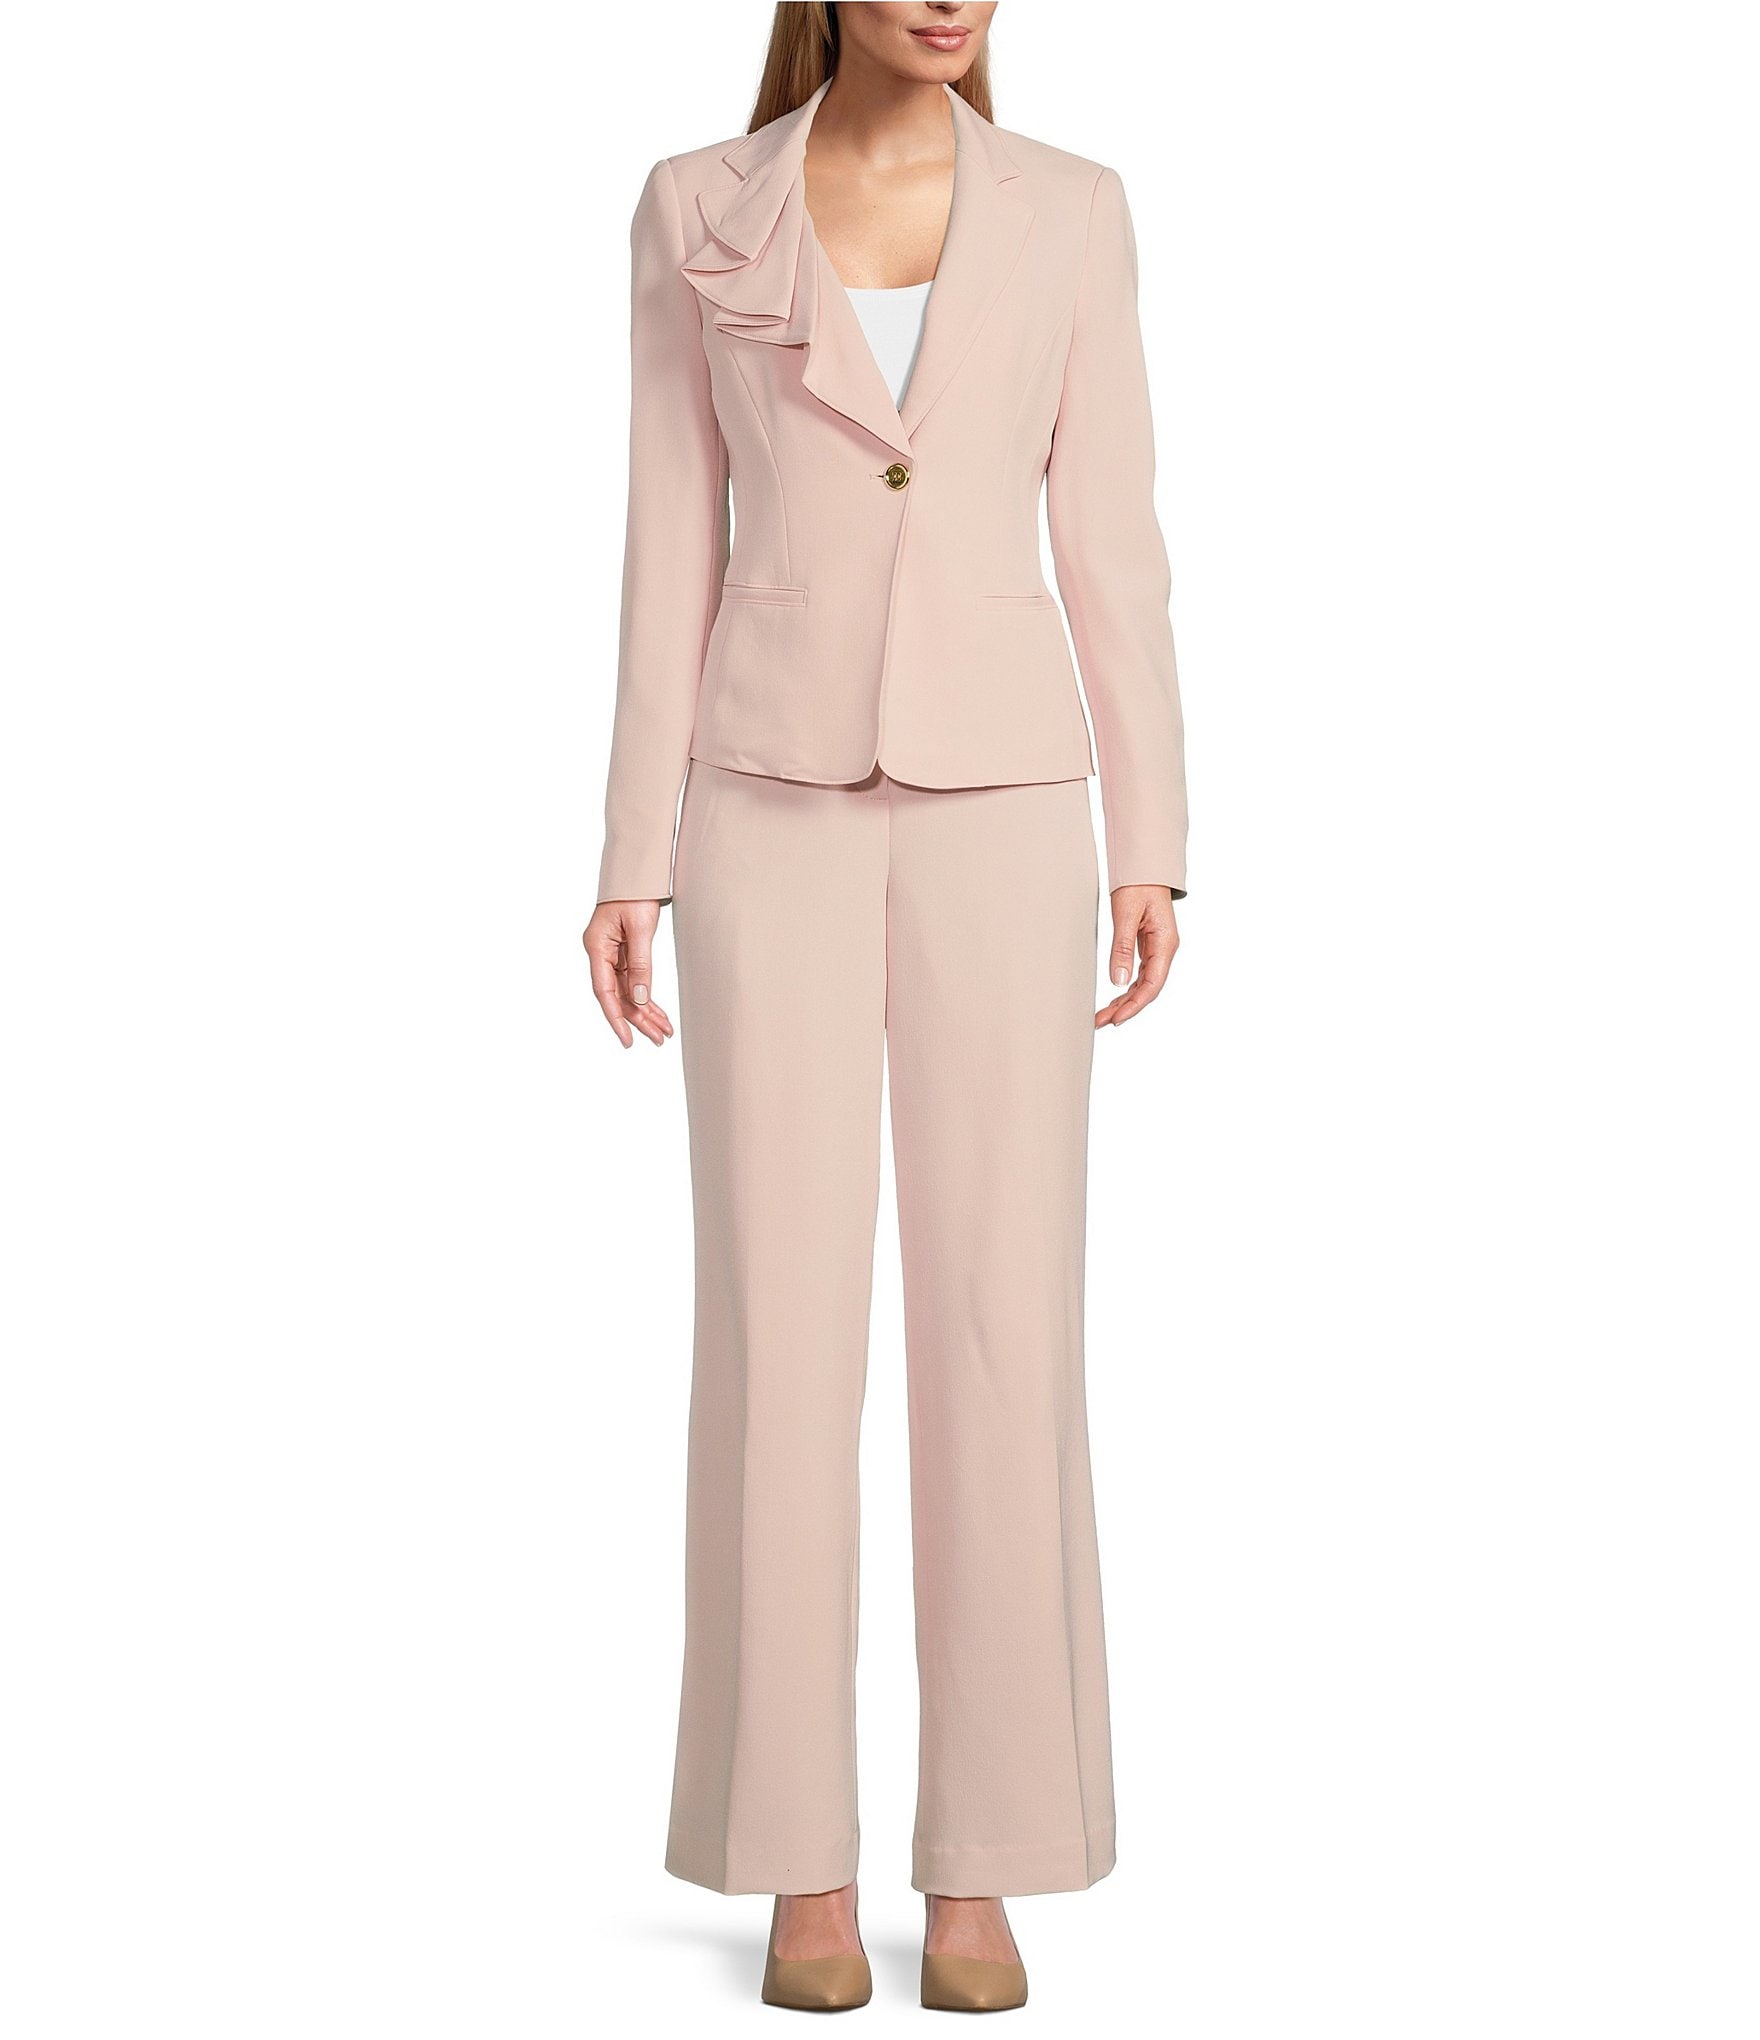 Dusty Pink Pantsuit for Women, Pink Formal Pantsuit for Office, Business Suit  Womens, Light Pink Blazer Trouser Suit for Women -  Canada